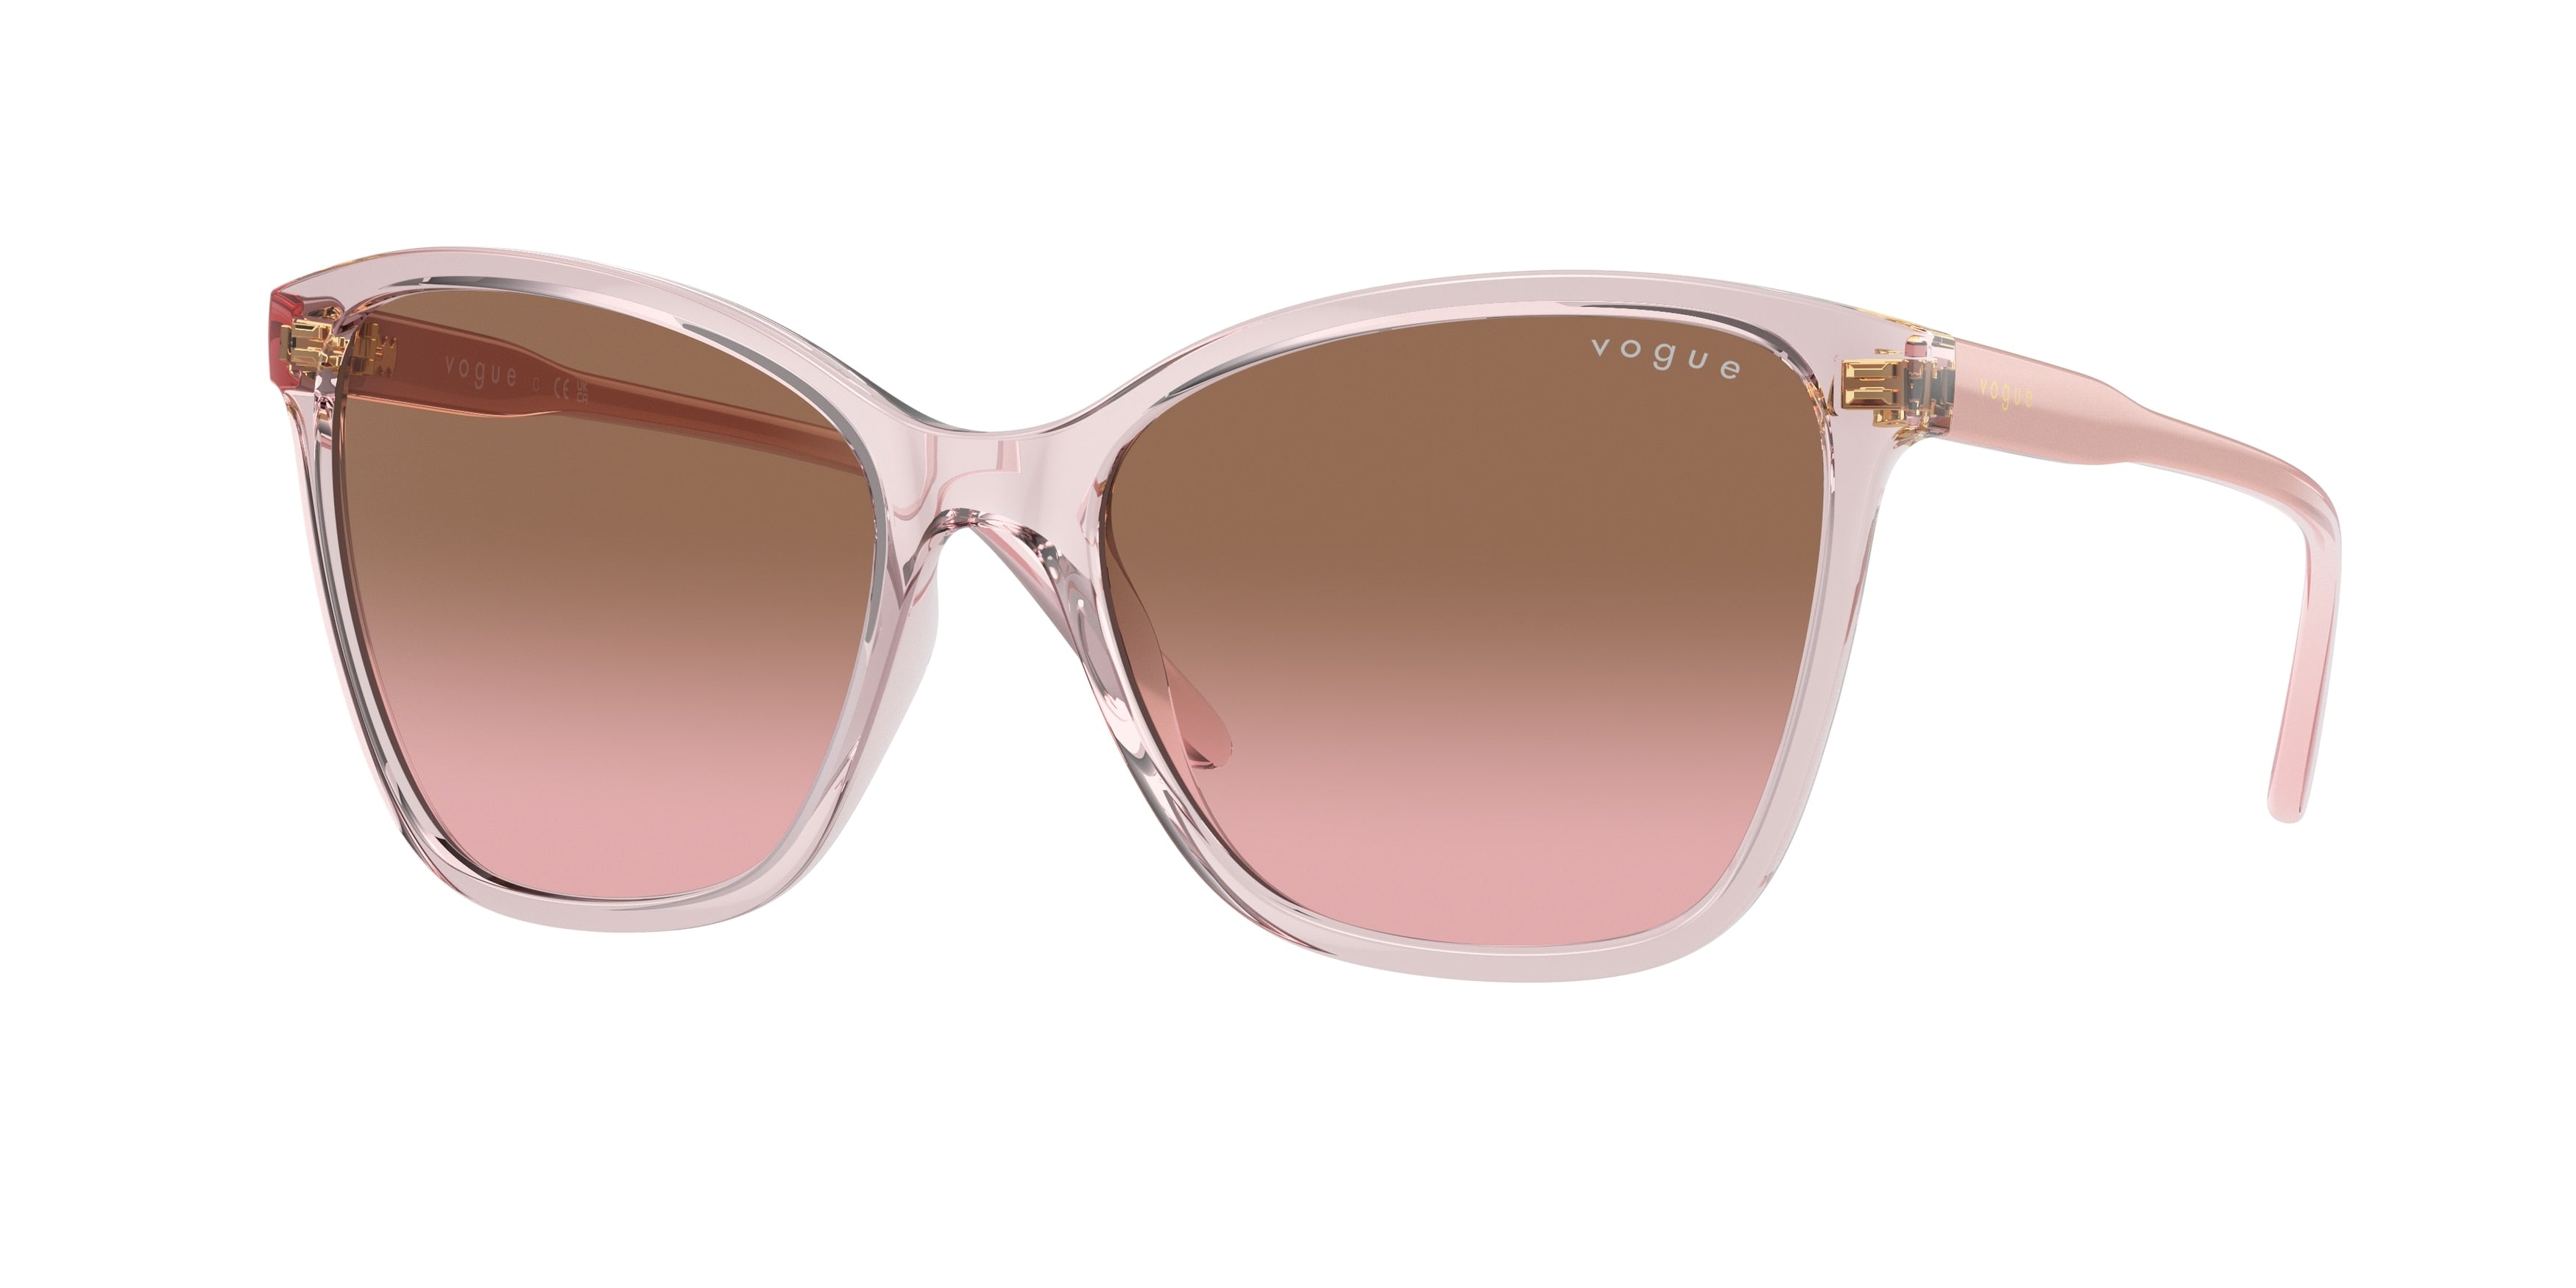 Vogue VO5520S Butterfly Sunglasses  294214-Transparent Pink 56-140-17 - Color Map Pink